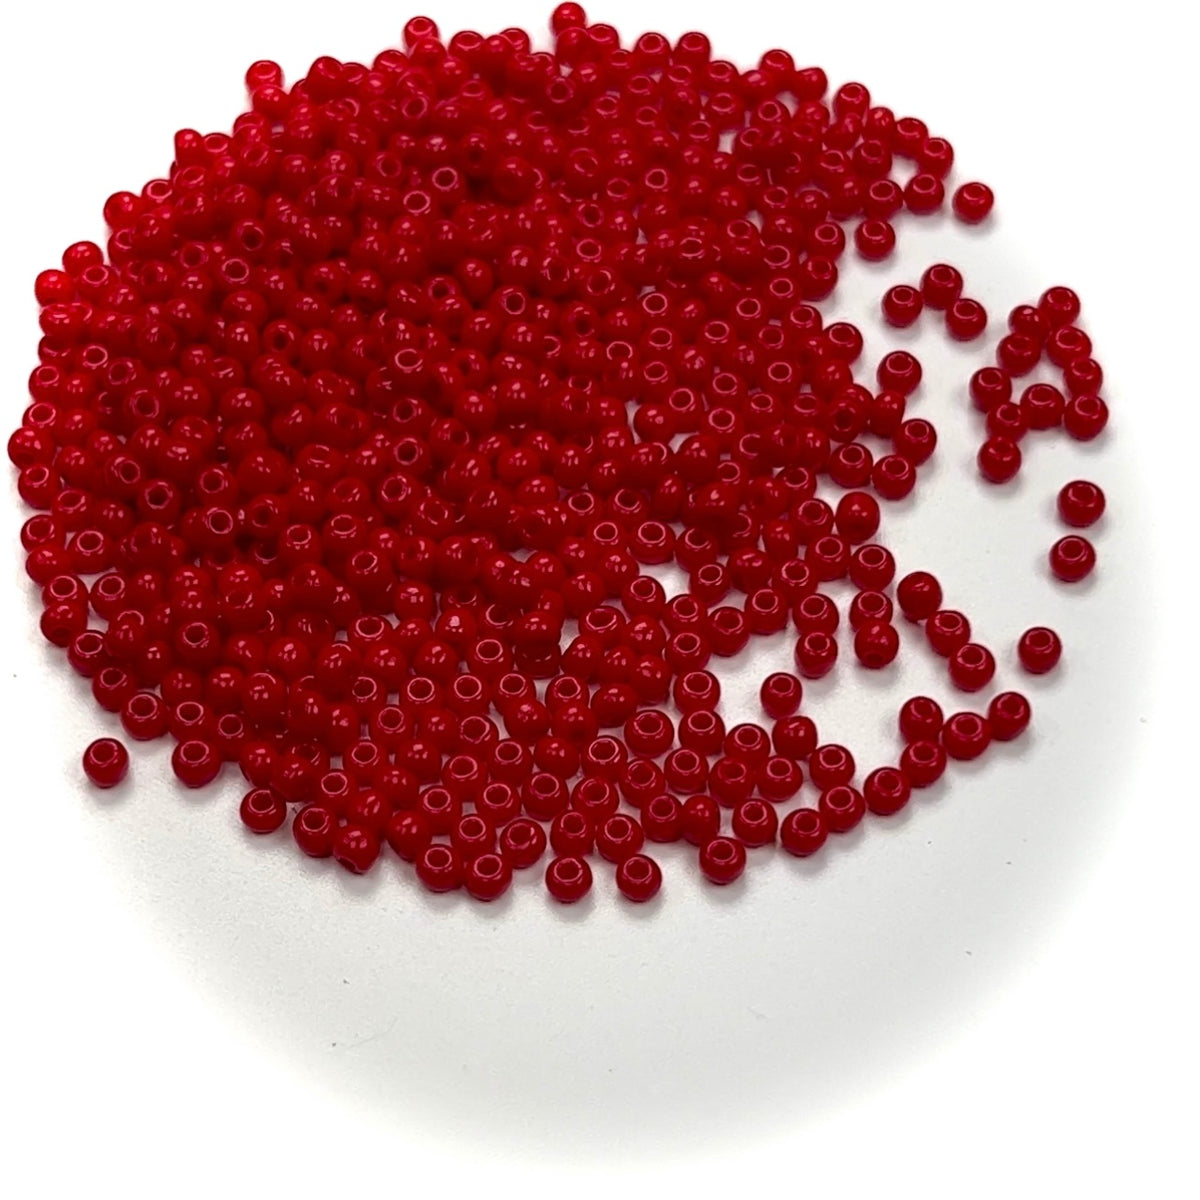 Crystal Red Vega, Czech Fire Polished Round Faceted Glass Beads, 16 in -  Crystals and Beads for Friends